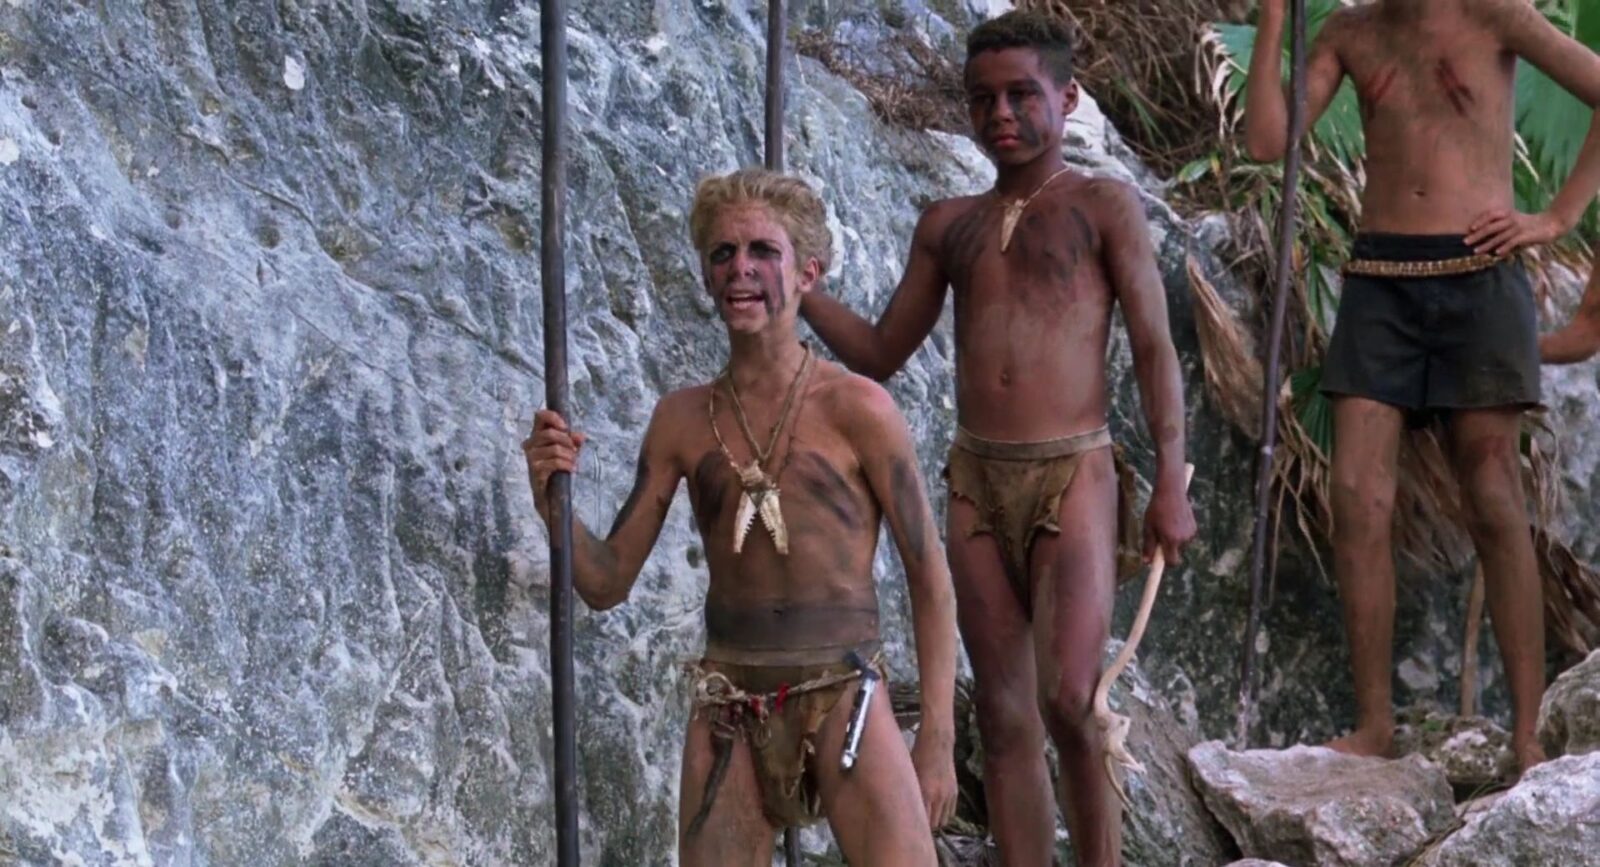 📚 Only a Person Who Has Read Enough Books Can Get 15/20 on This Quiz Lord of the Flies 1990